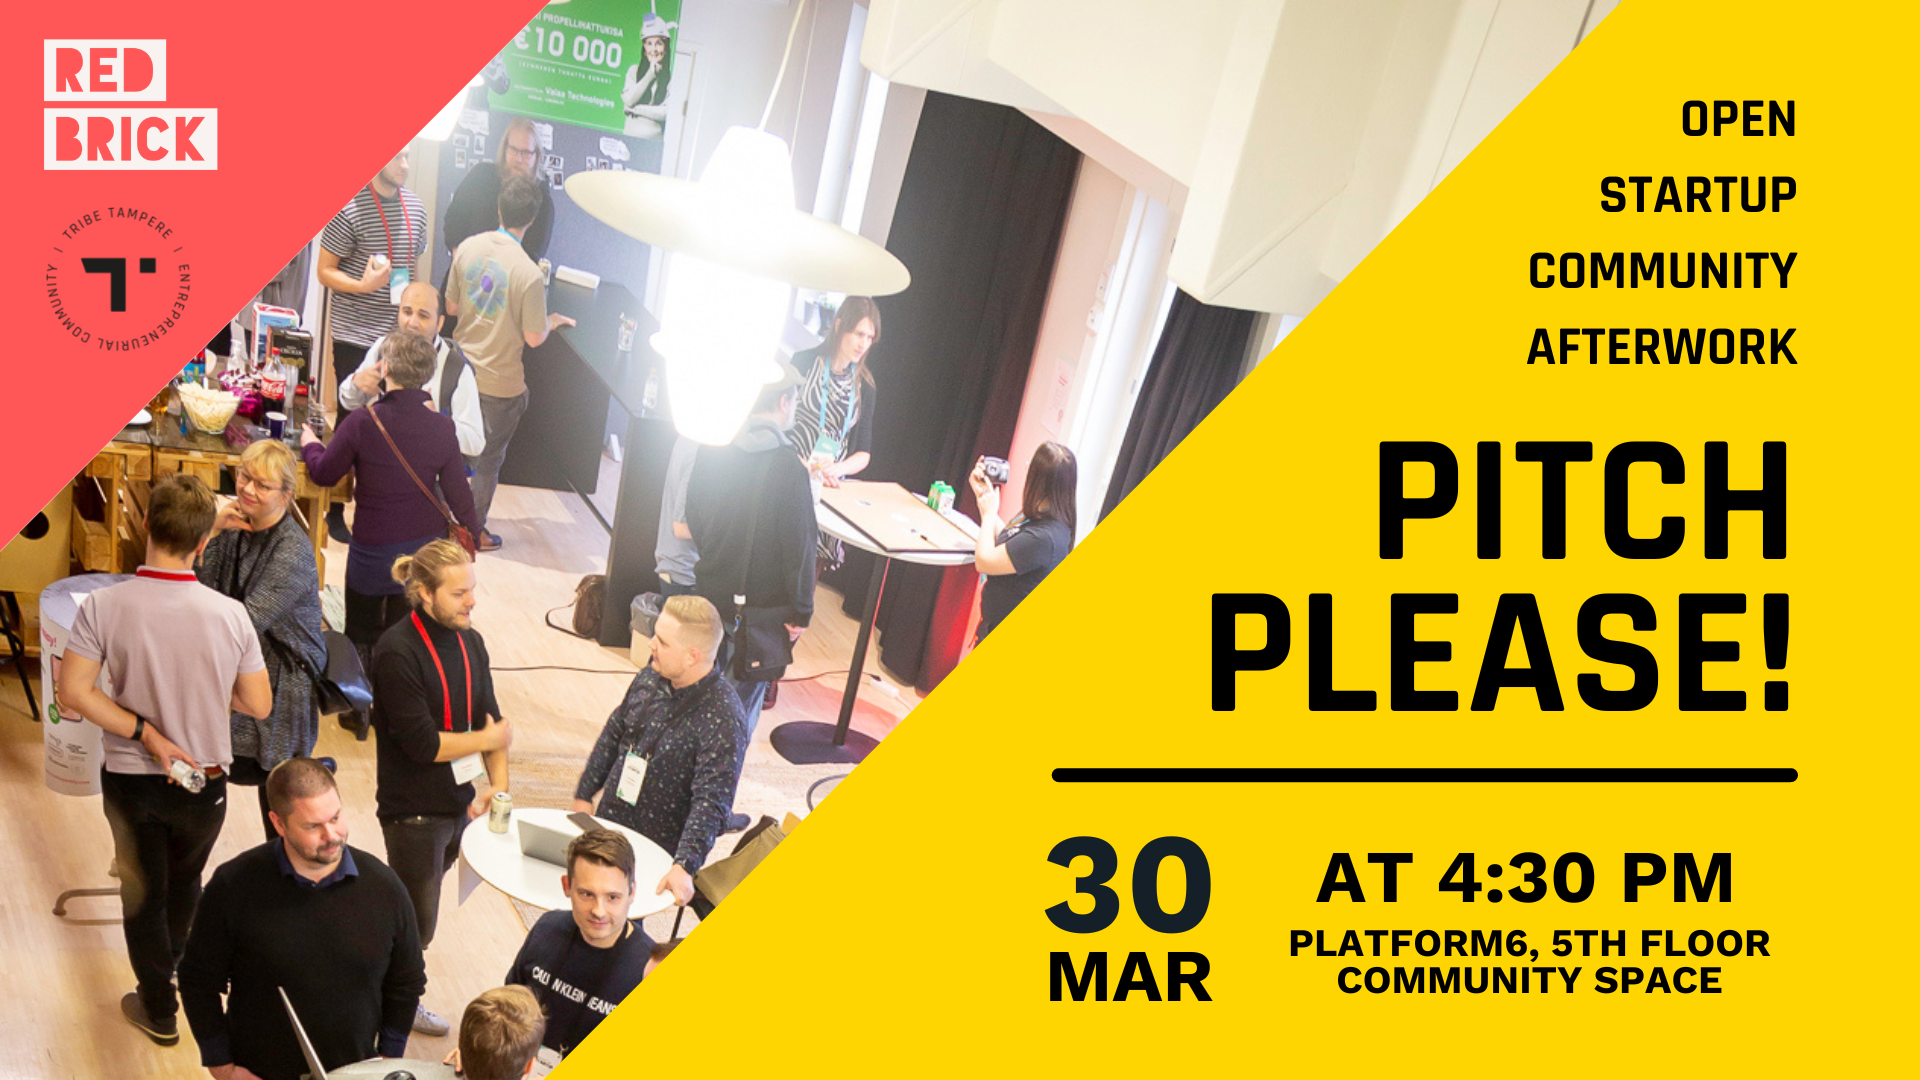 Open startup community afterwork: PITCH, PLEASE!